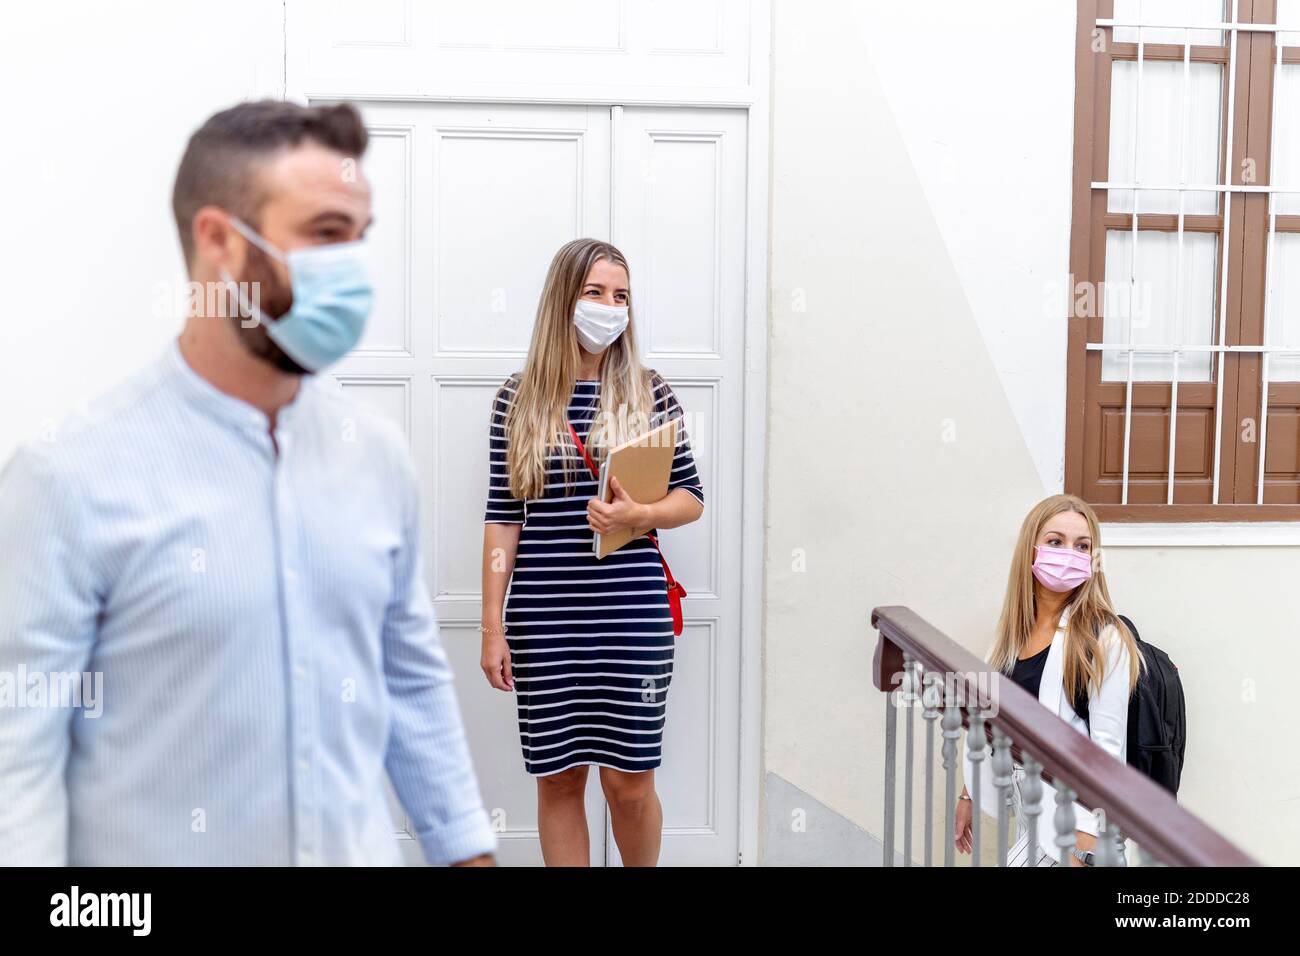 Coworkers maintaining social distance while entering at office Stock Photo